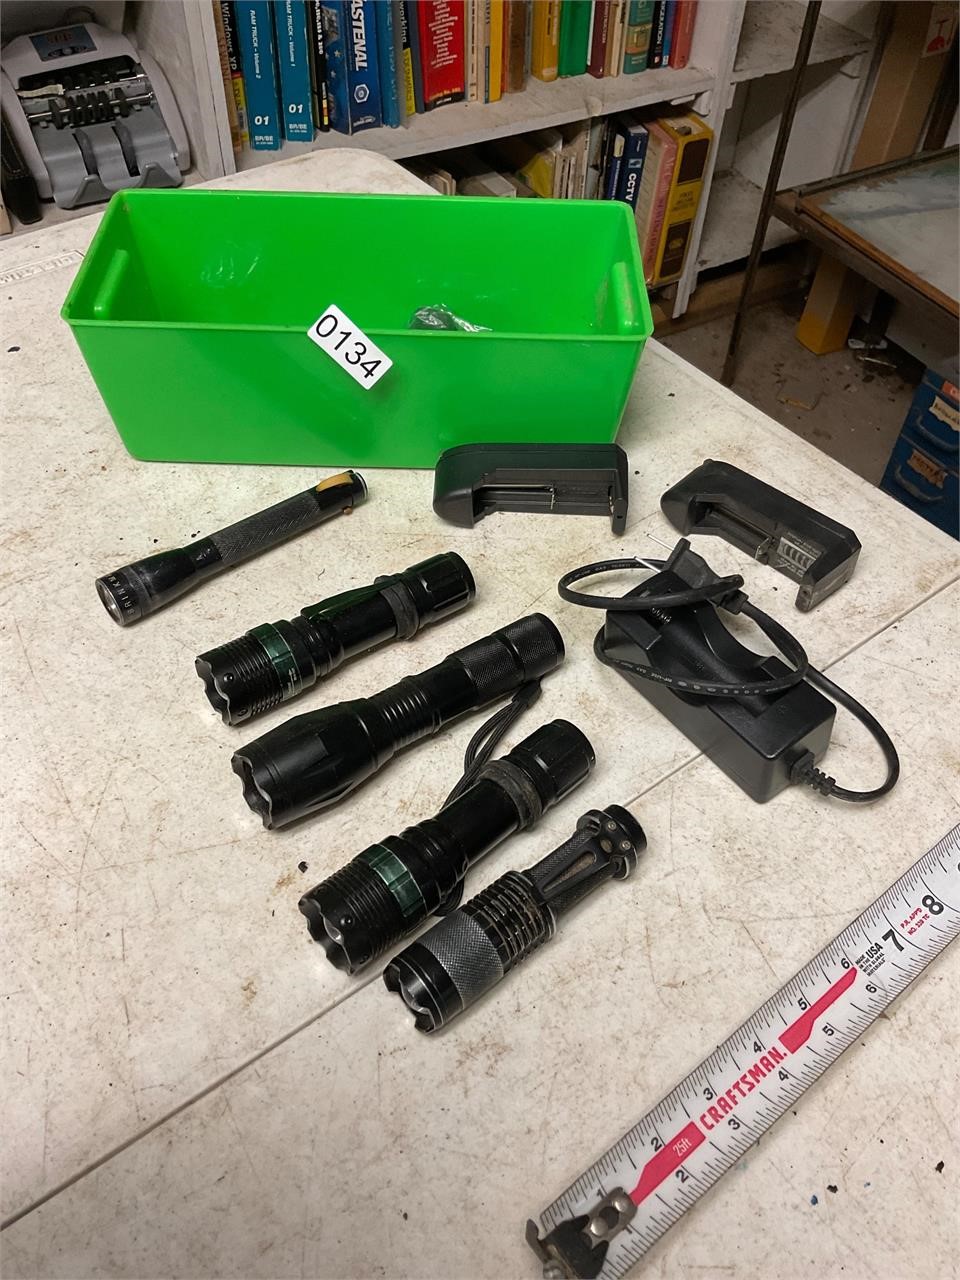 Assorted LED flashlights and chargers